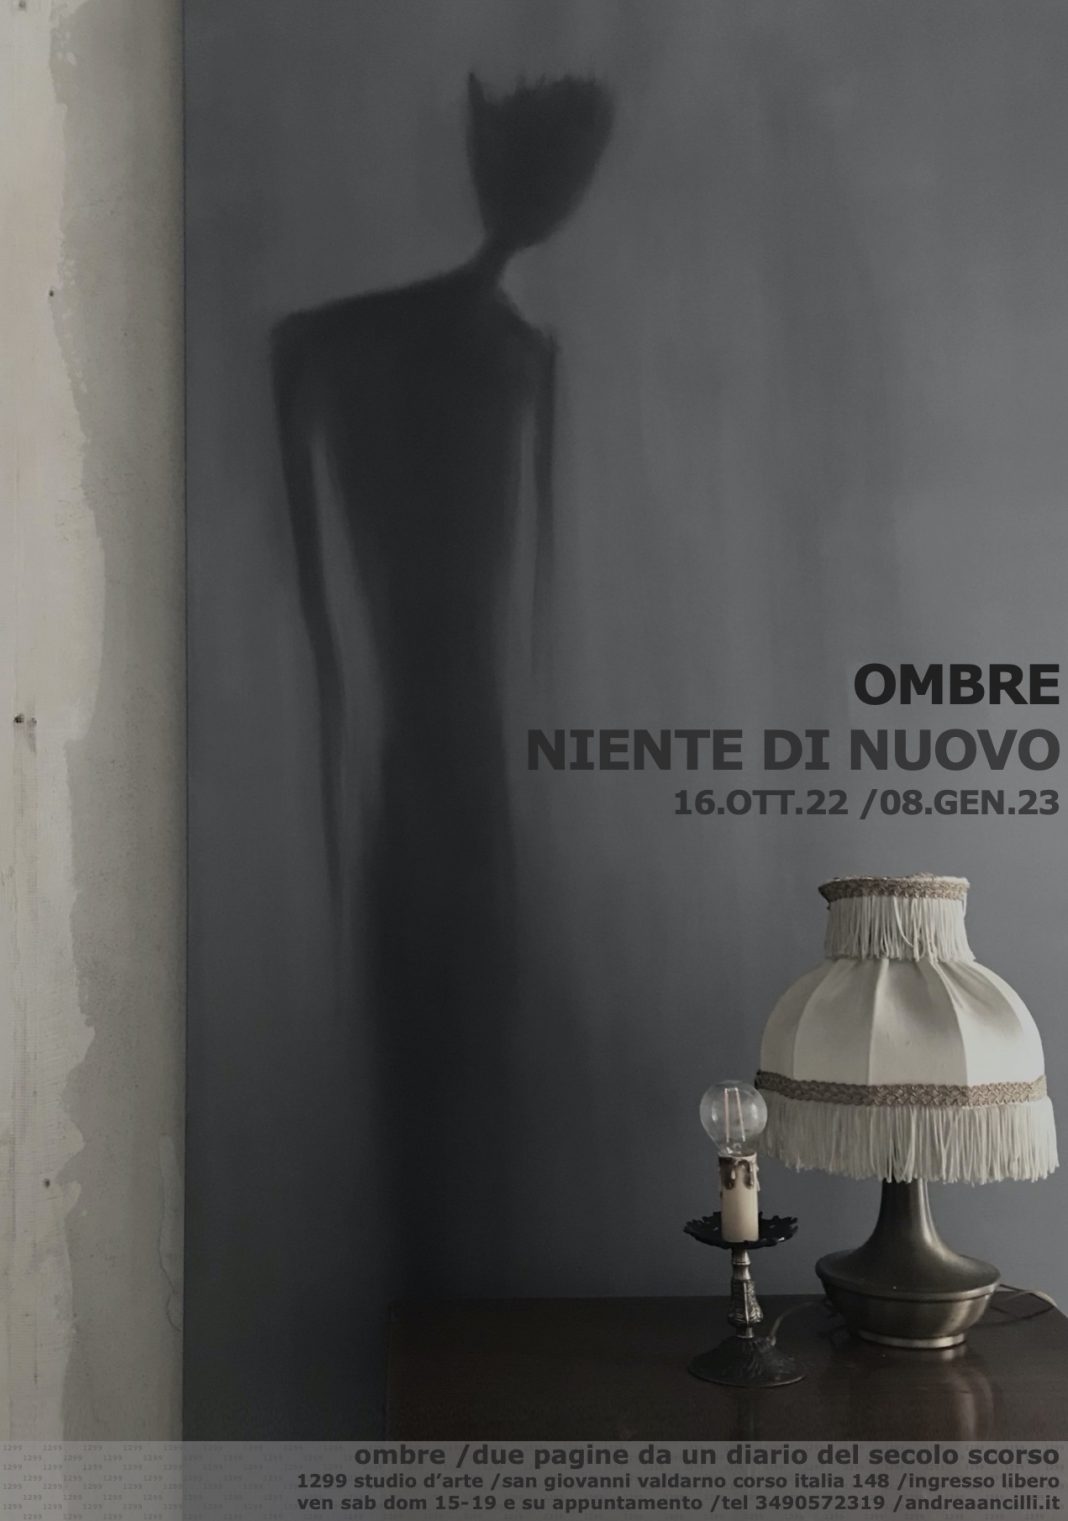 ombre / niente di nuovohttps://www.exibart.com/repository/media/formidable/11/img/f75/OM001-1068x1521.jpg